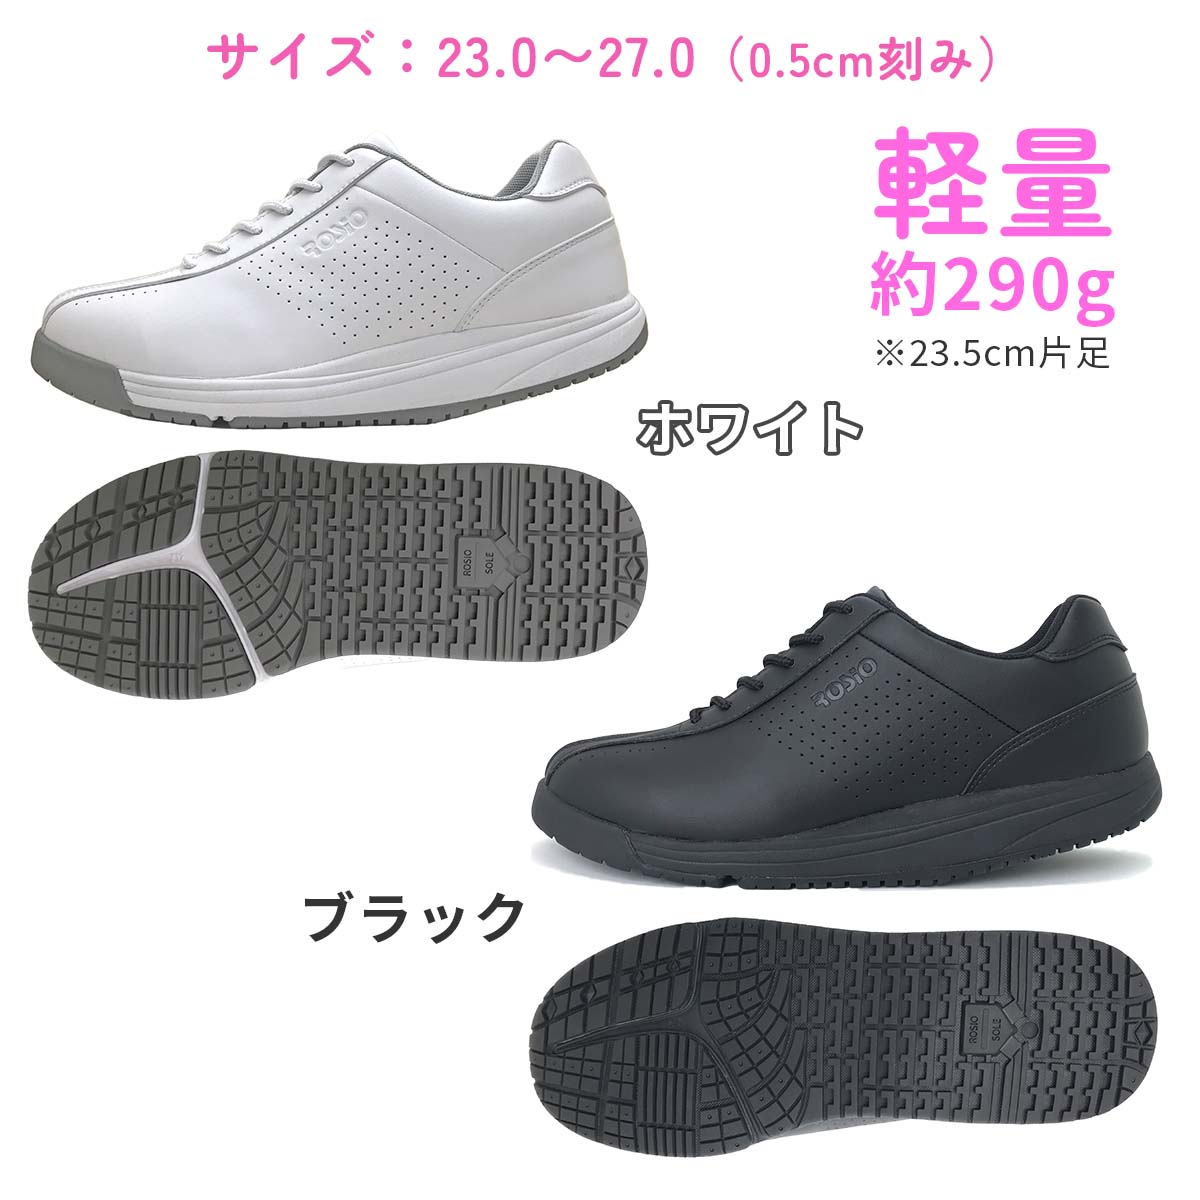 shoes_rosio_rgt